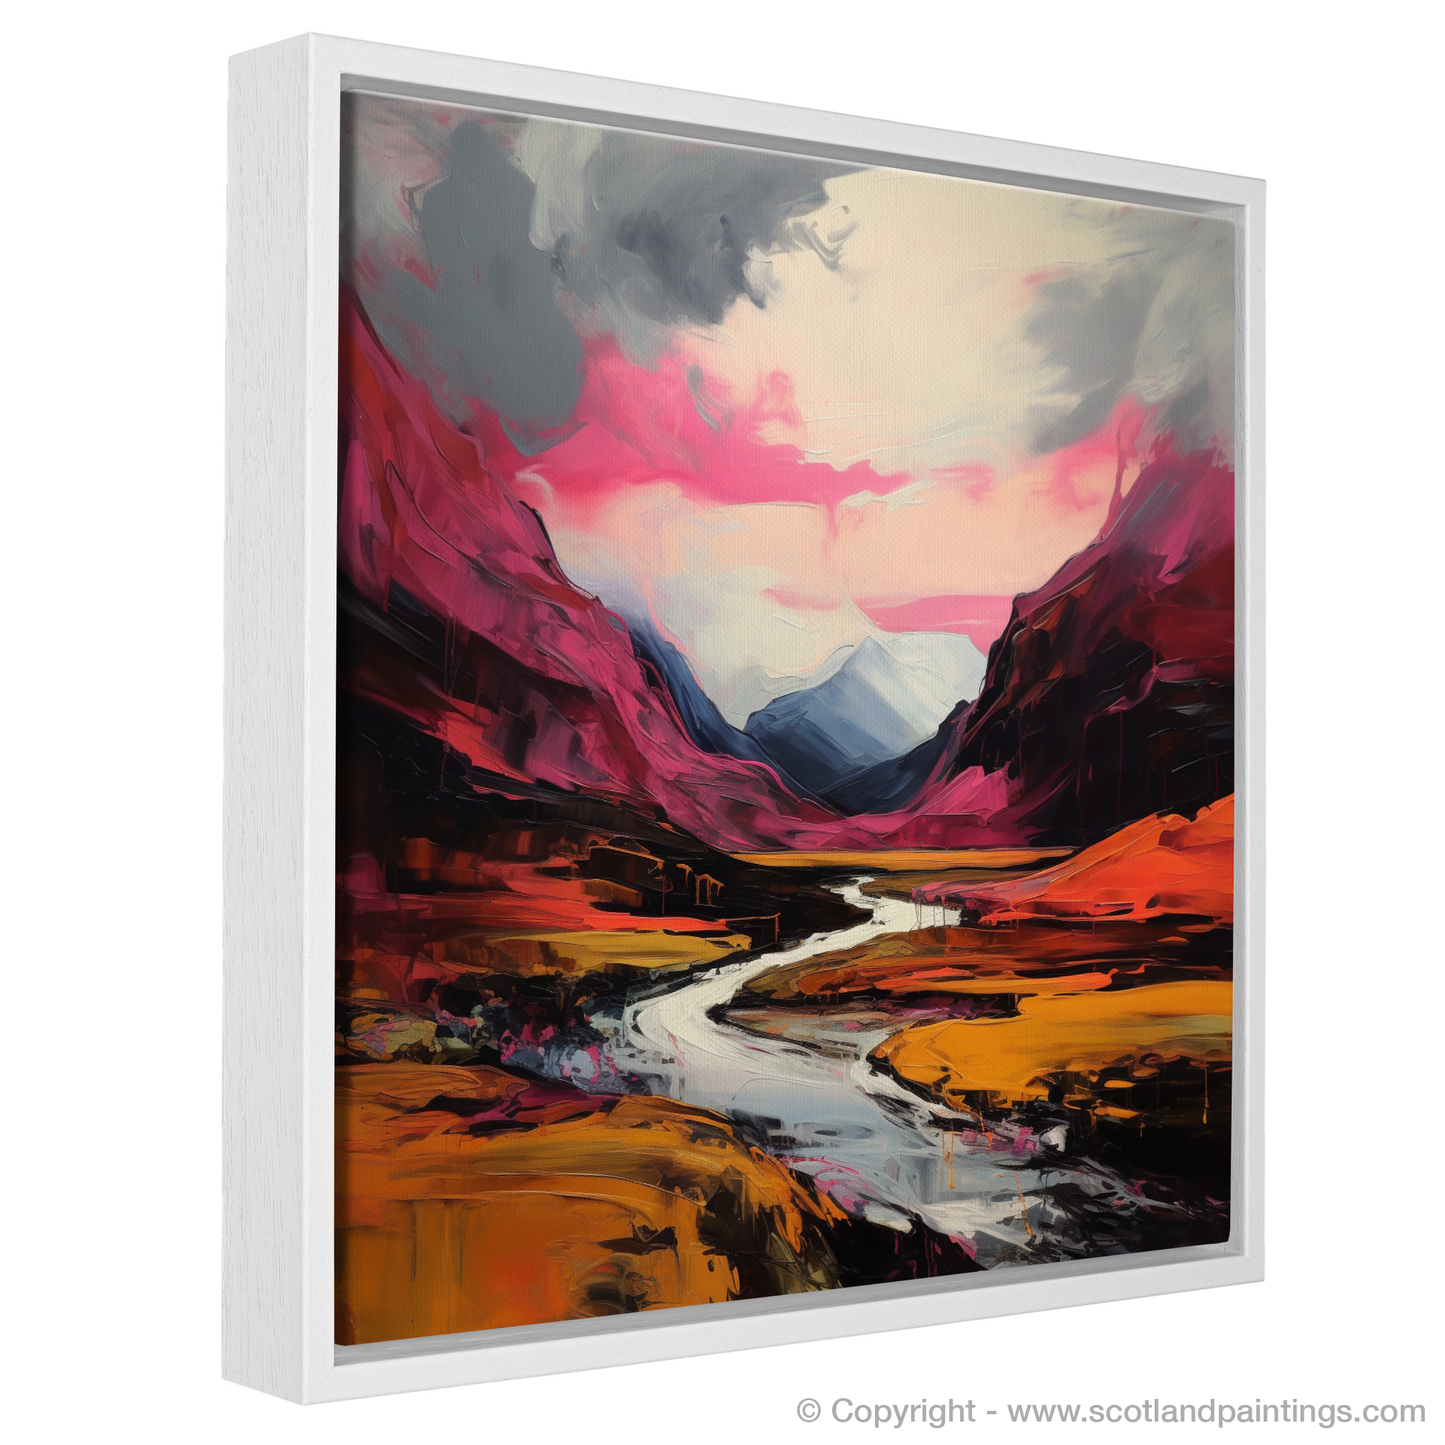 Painting and Art Print of Crimson clouds over valley in Glencoe entitled "Crimson Skies Over Glencoe Valley: An Expressionist Journey".